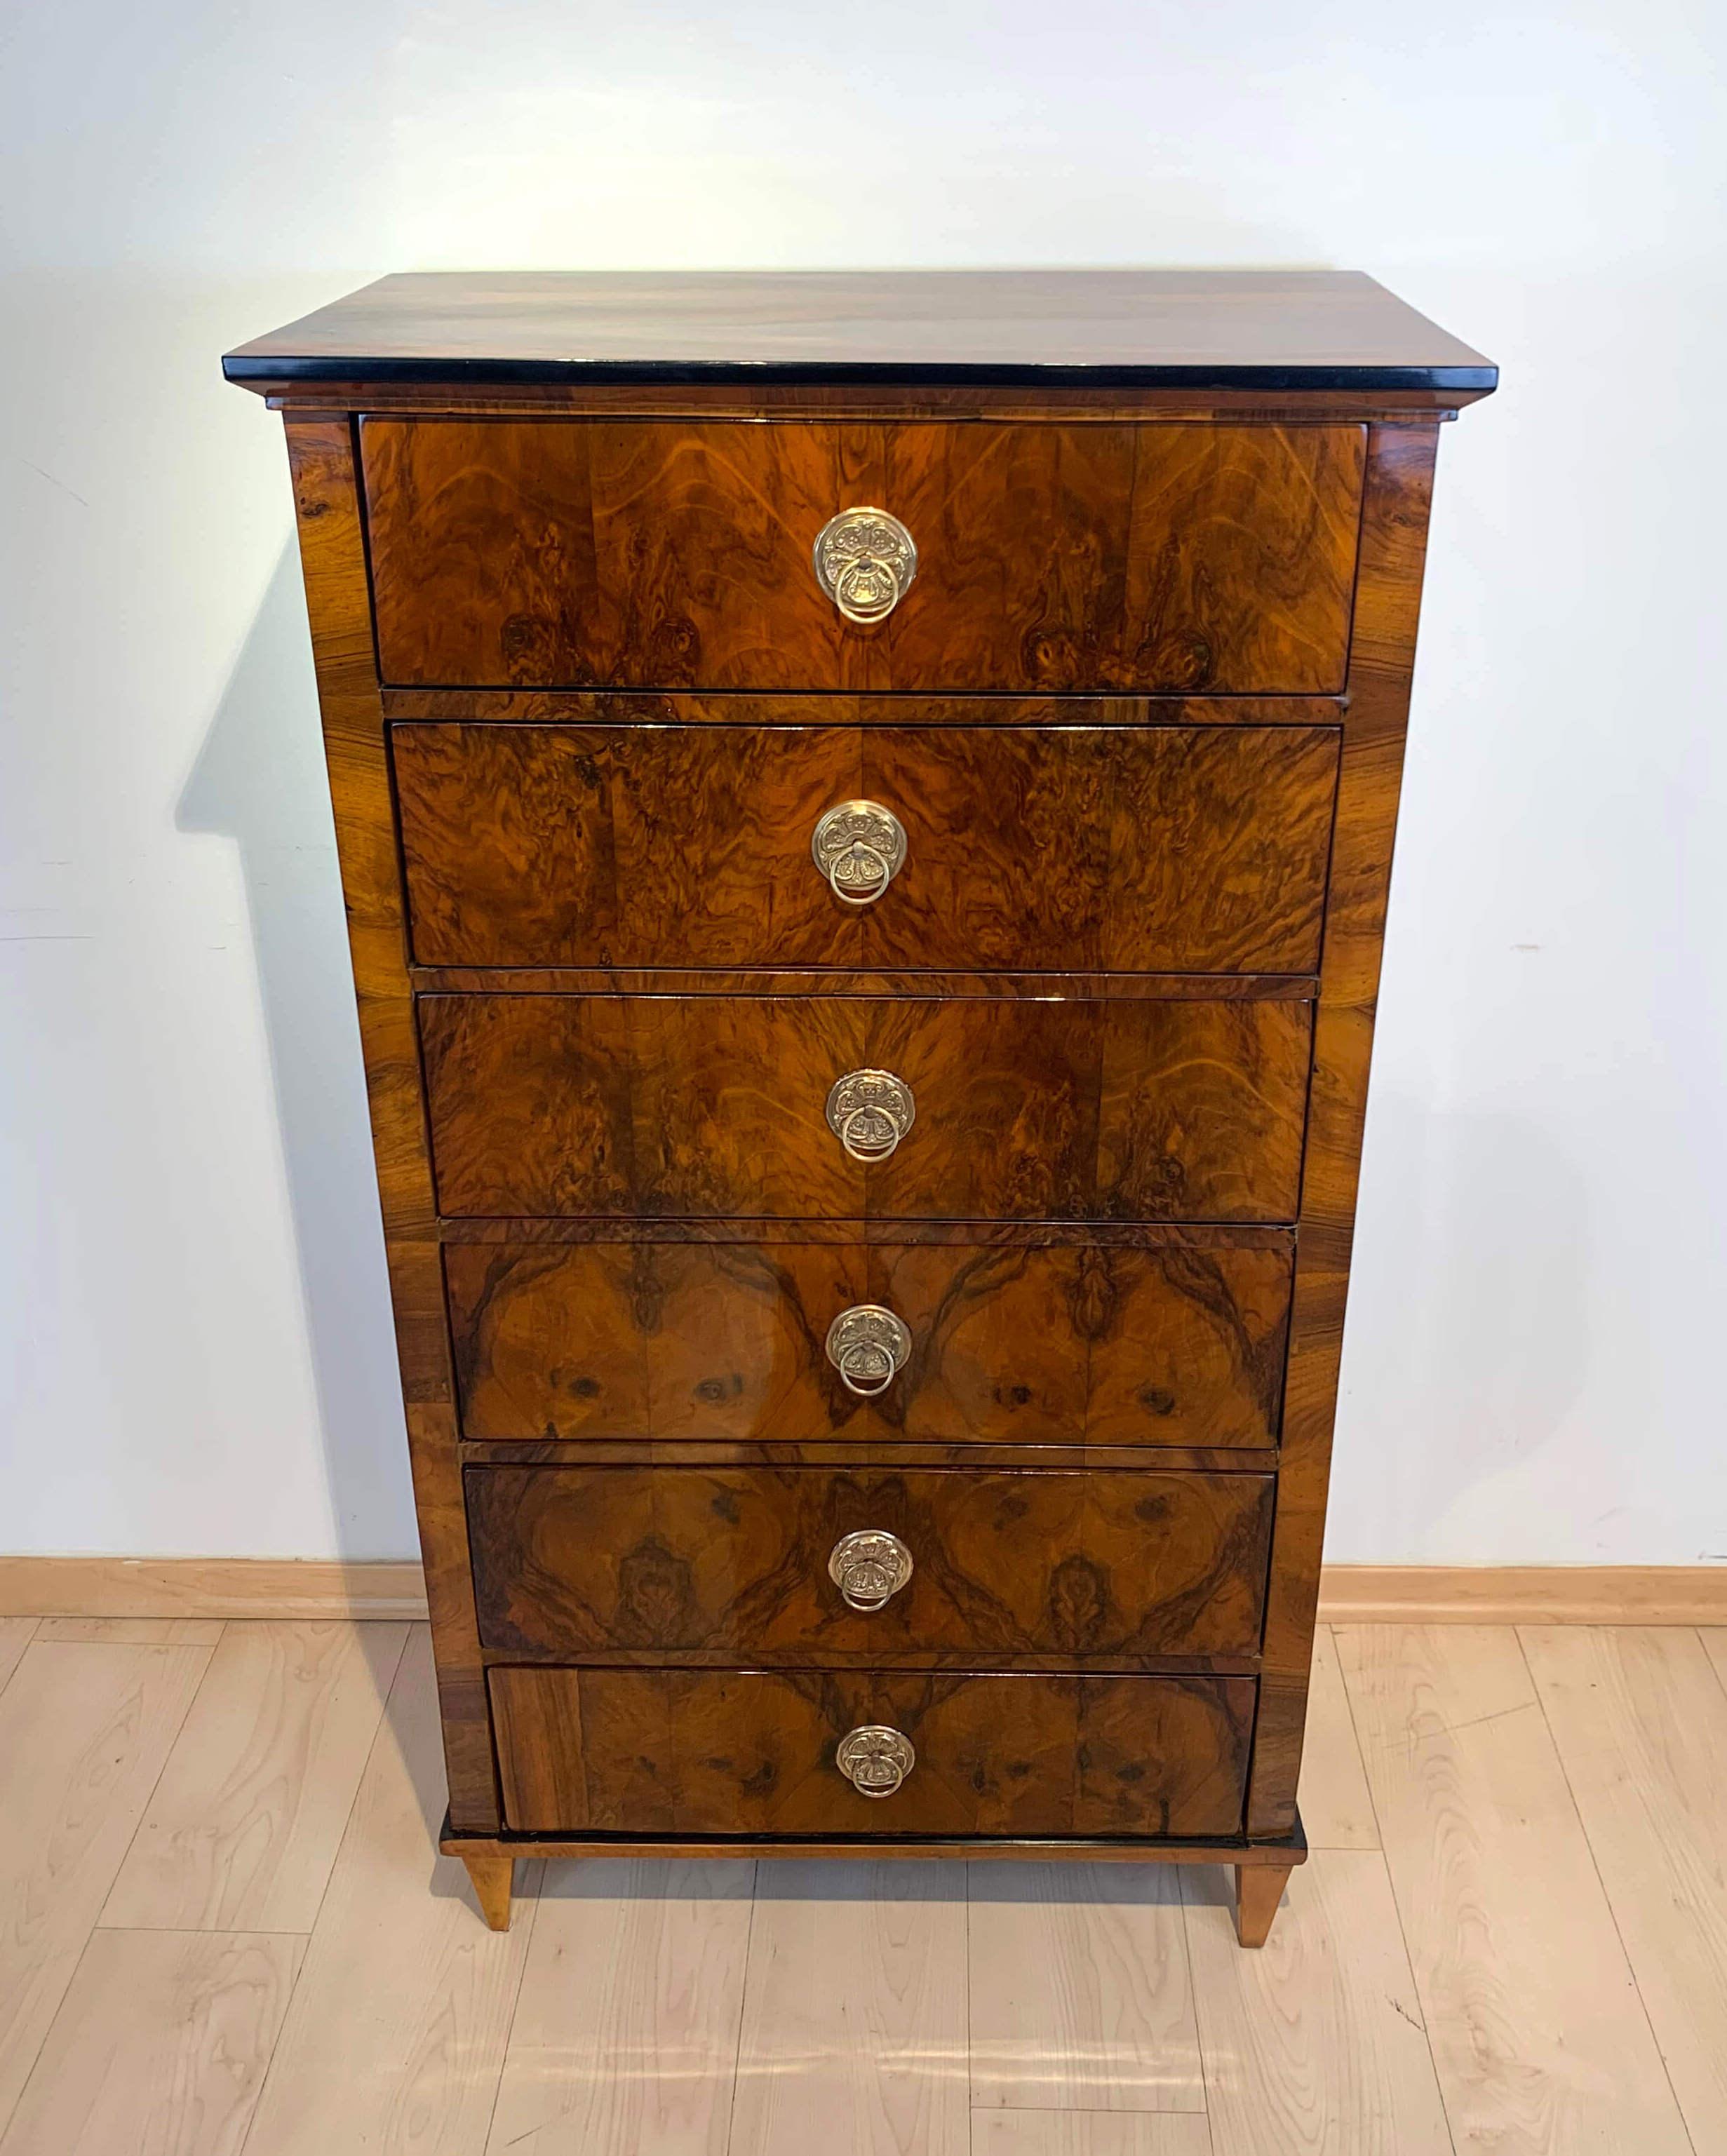 Early neoclassical Biedermeier chiffonier / high chest with 6 drawers from Austria, circa 1820.

Walnut veneered on pine. Original brass fittings / handles
Restored and shellac hand-polished.

Dimensions: H 135 cm x W 76 cm x D 45 cm.